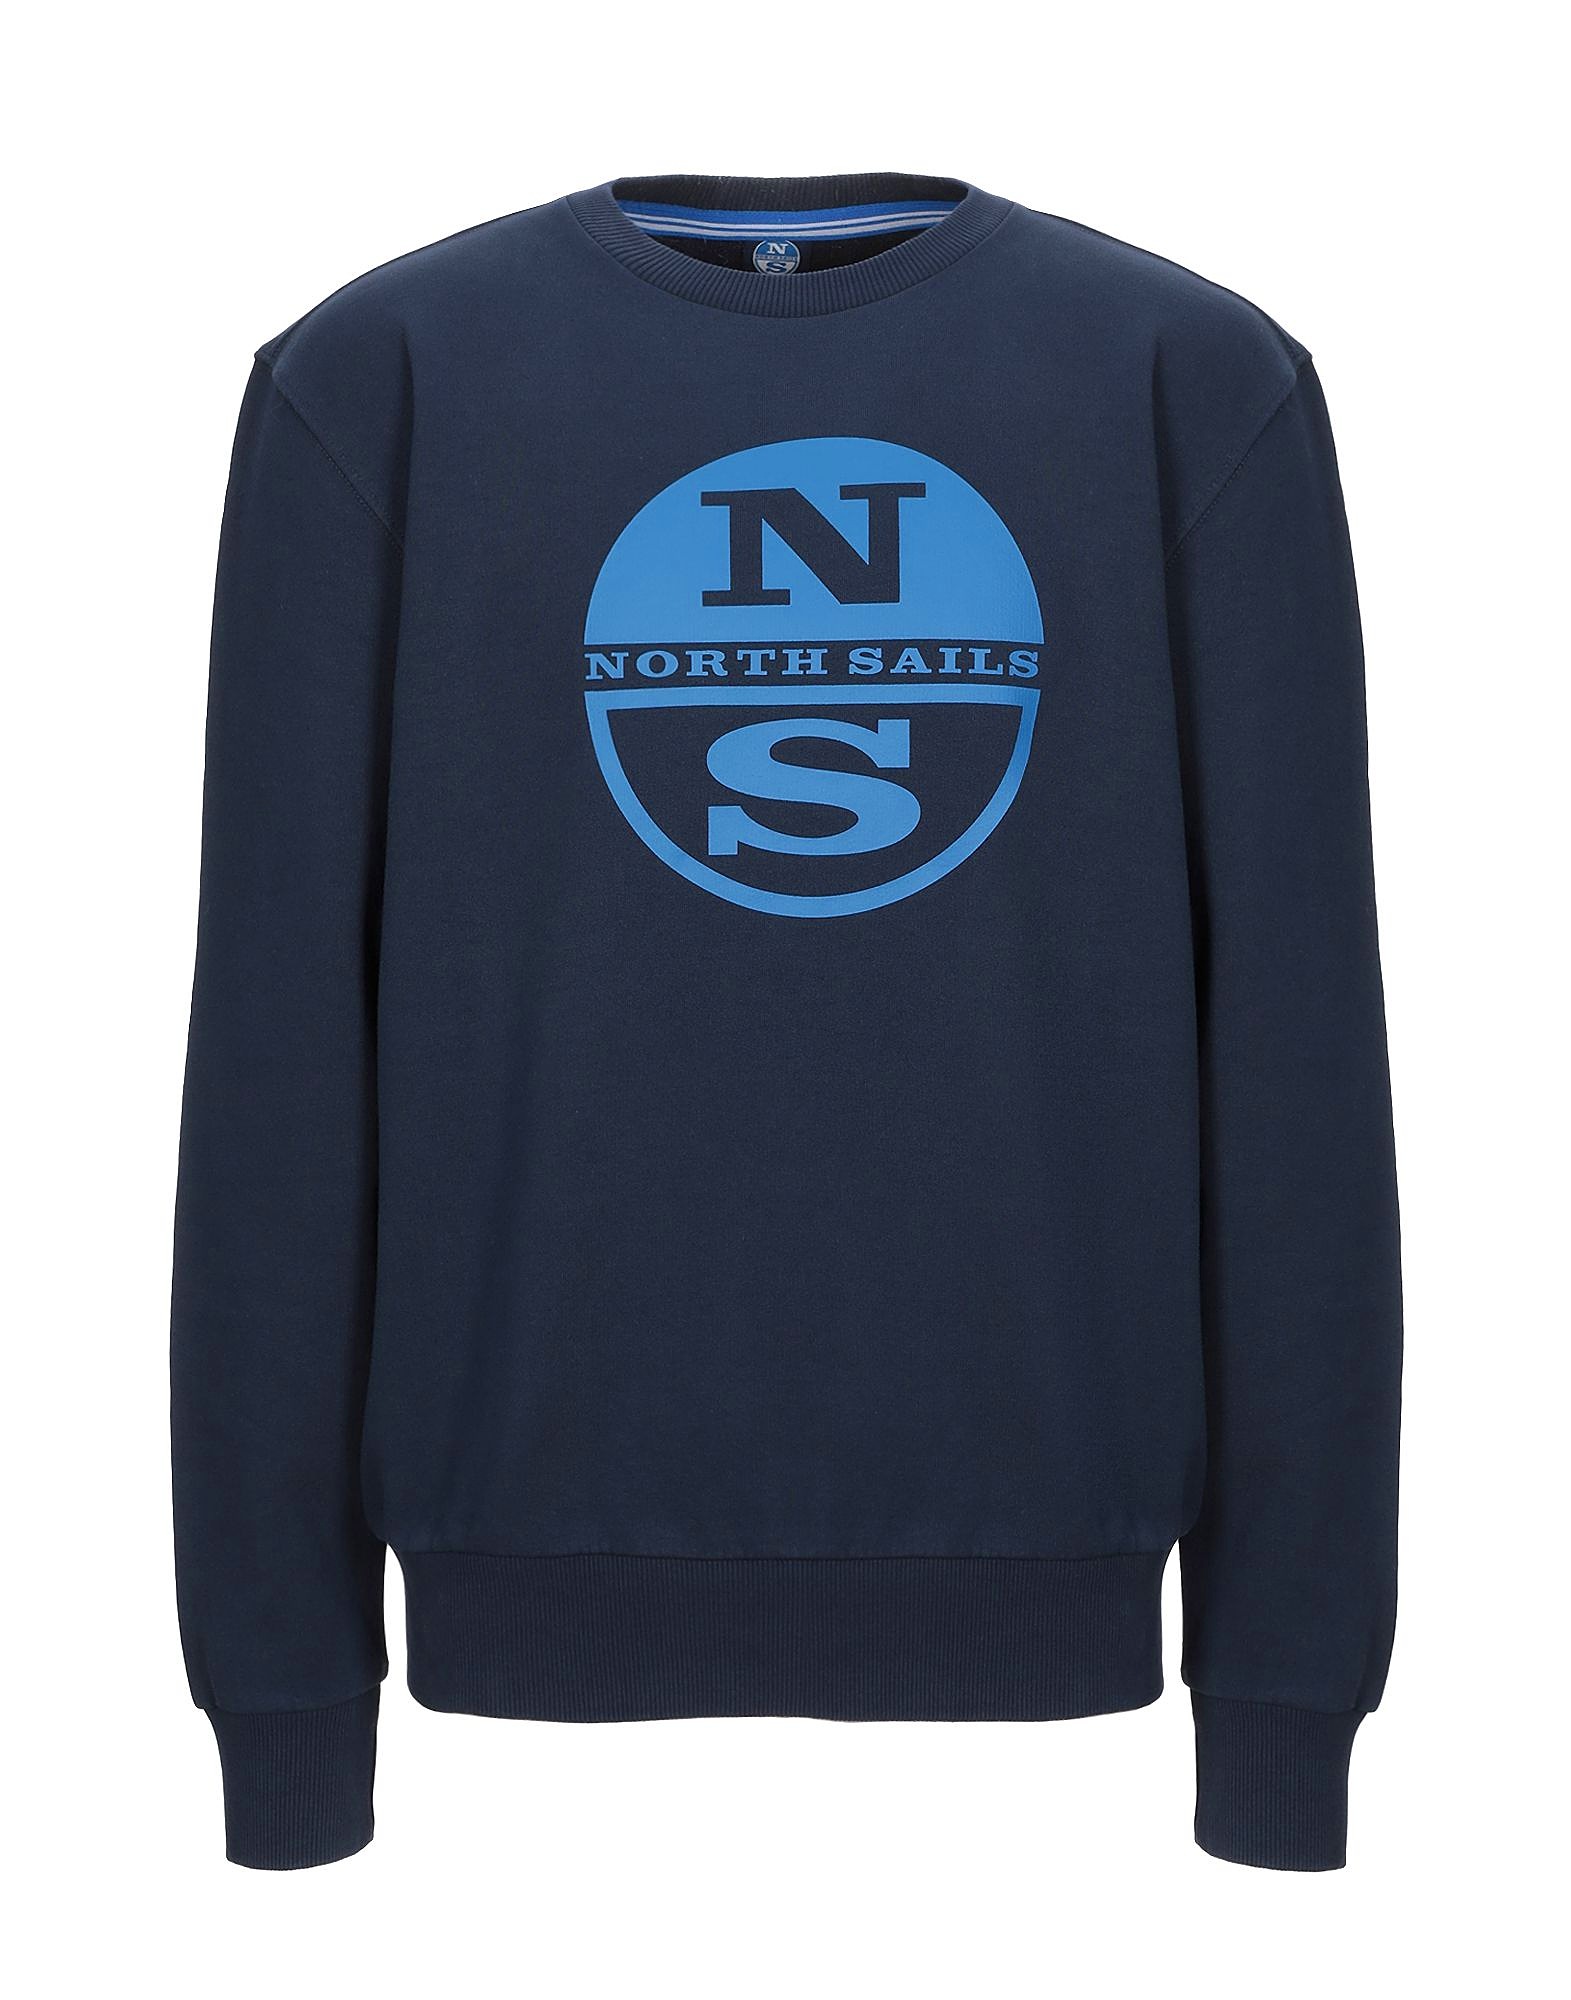 North Sails Sweatshirt – DD Clothing – Top Labels @ Bottom Prices